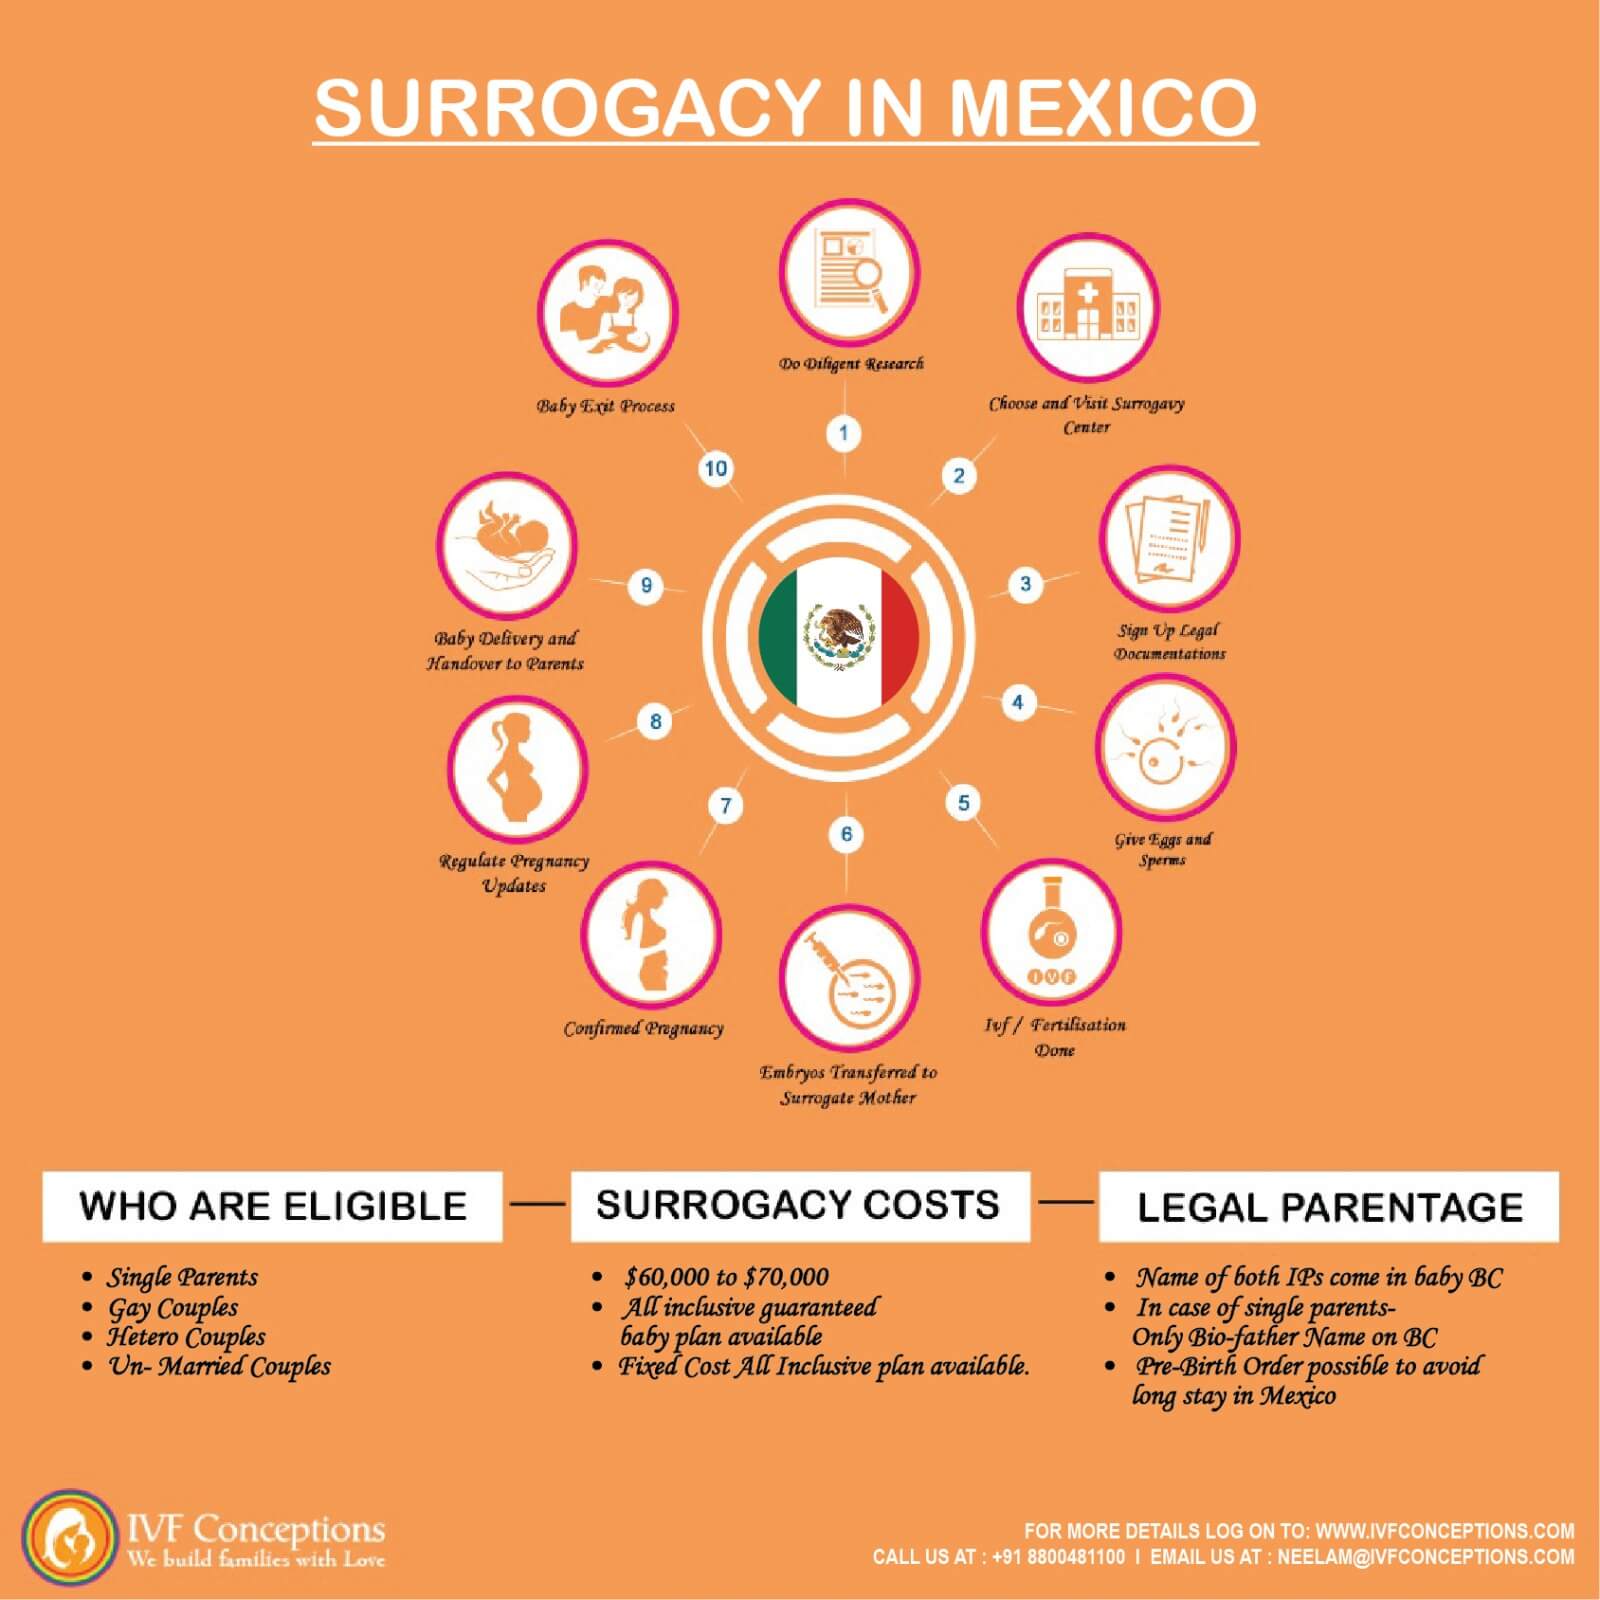 Surrogacy in Mexico cost less than US